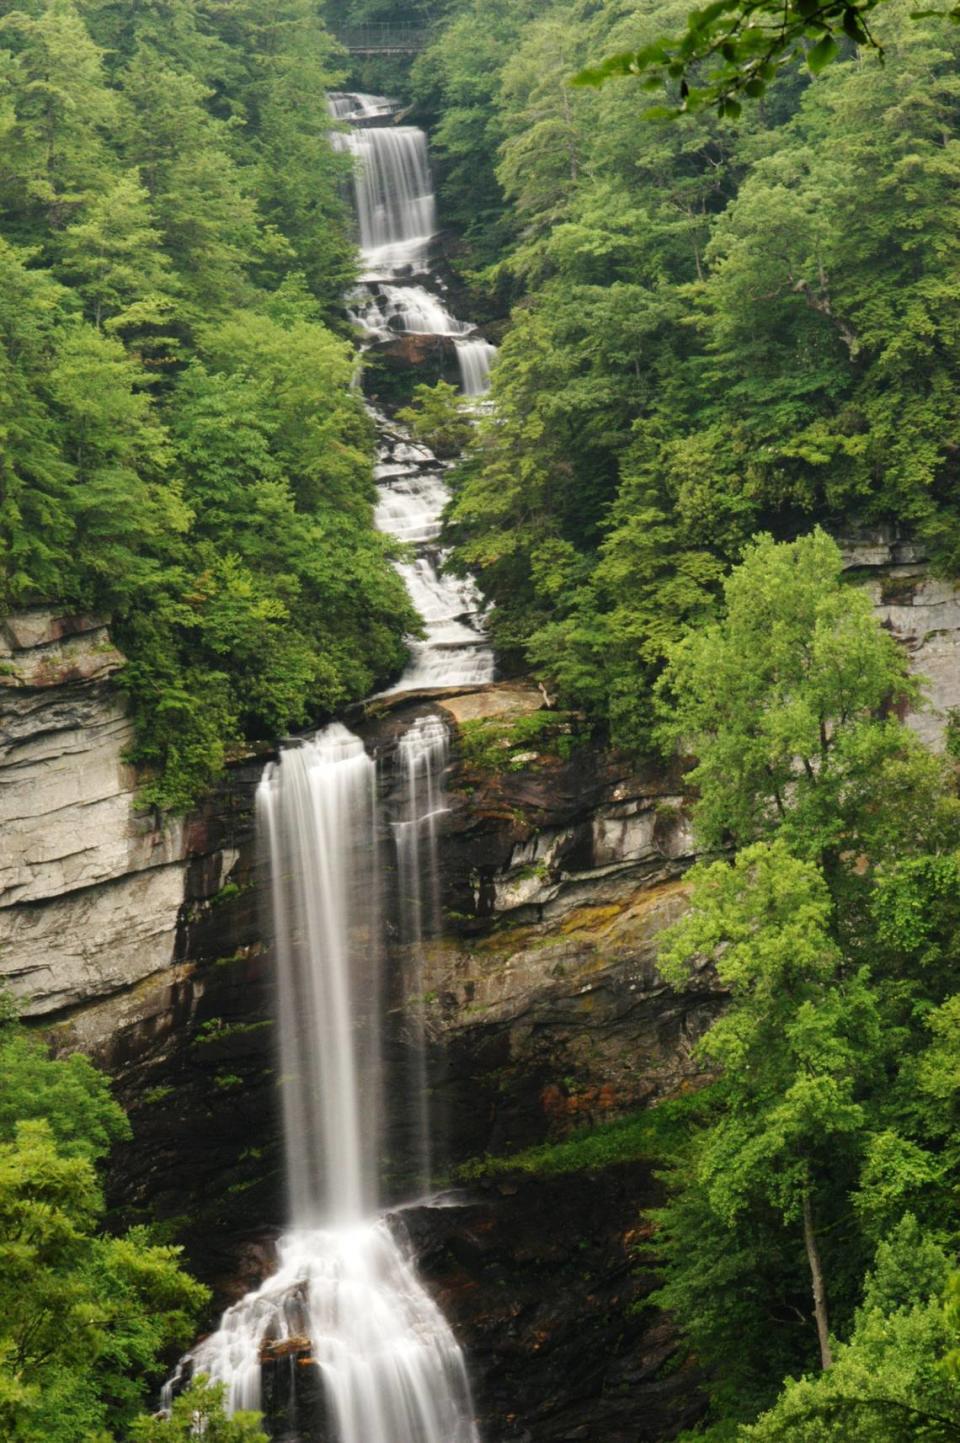 At 400 feet, Raven Cliff Falls are the highest in South Carolina. The trail to the falls, located in Caesars Head State Park, is a moderate 2.2-mile hike.